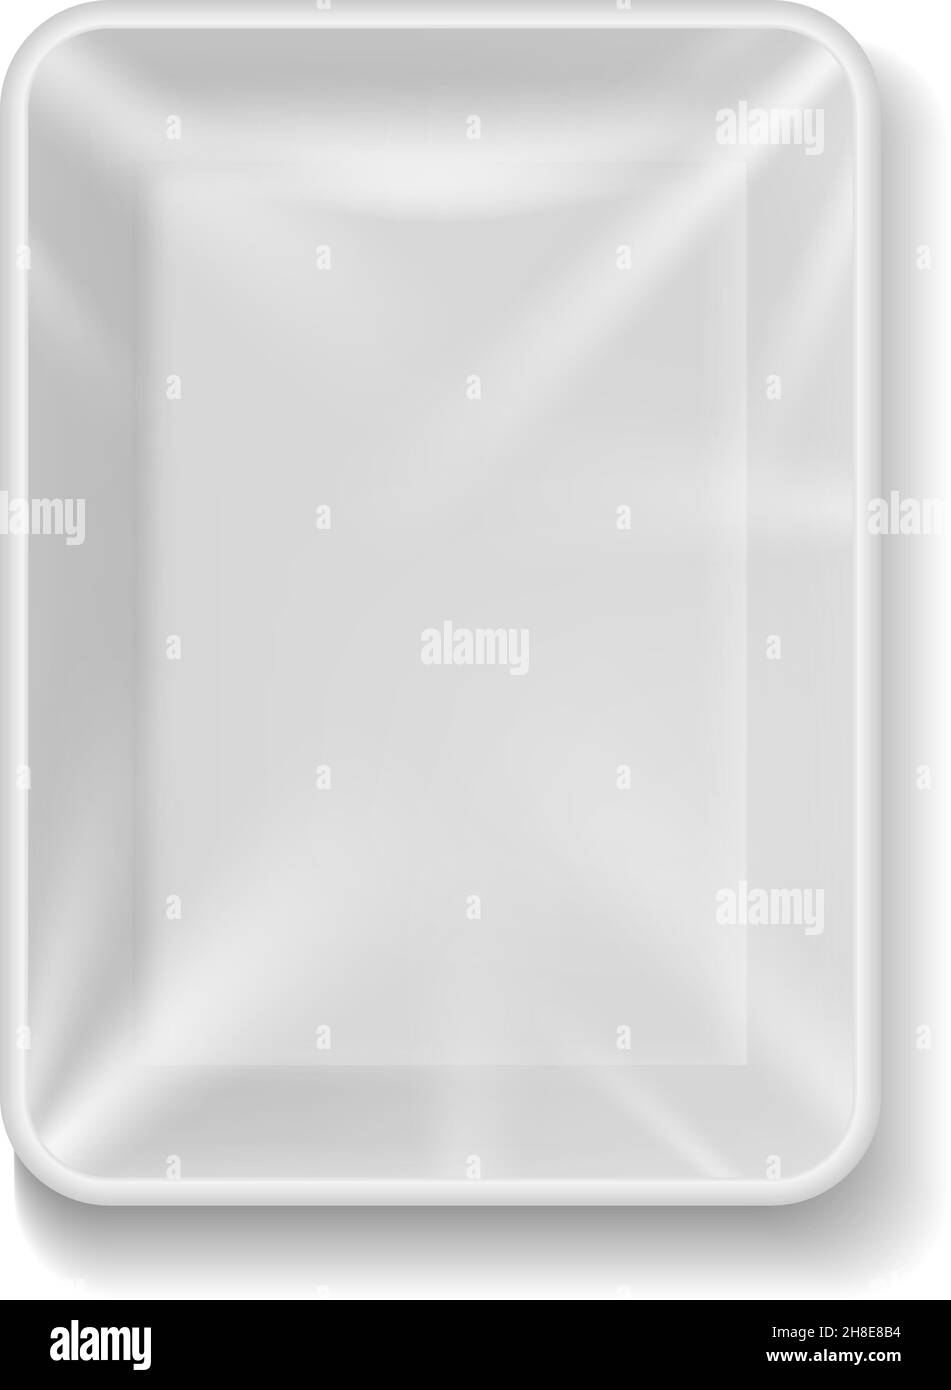 Tray plastic. Food package with transparent wrap. Realistic white empty container for vegetables, fruits and meat. Vacuum square lunch or dinner box Stock Vector